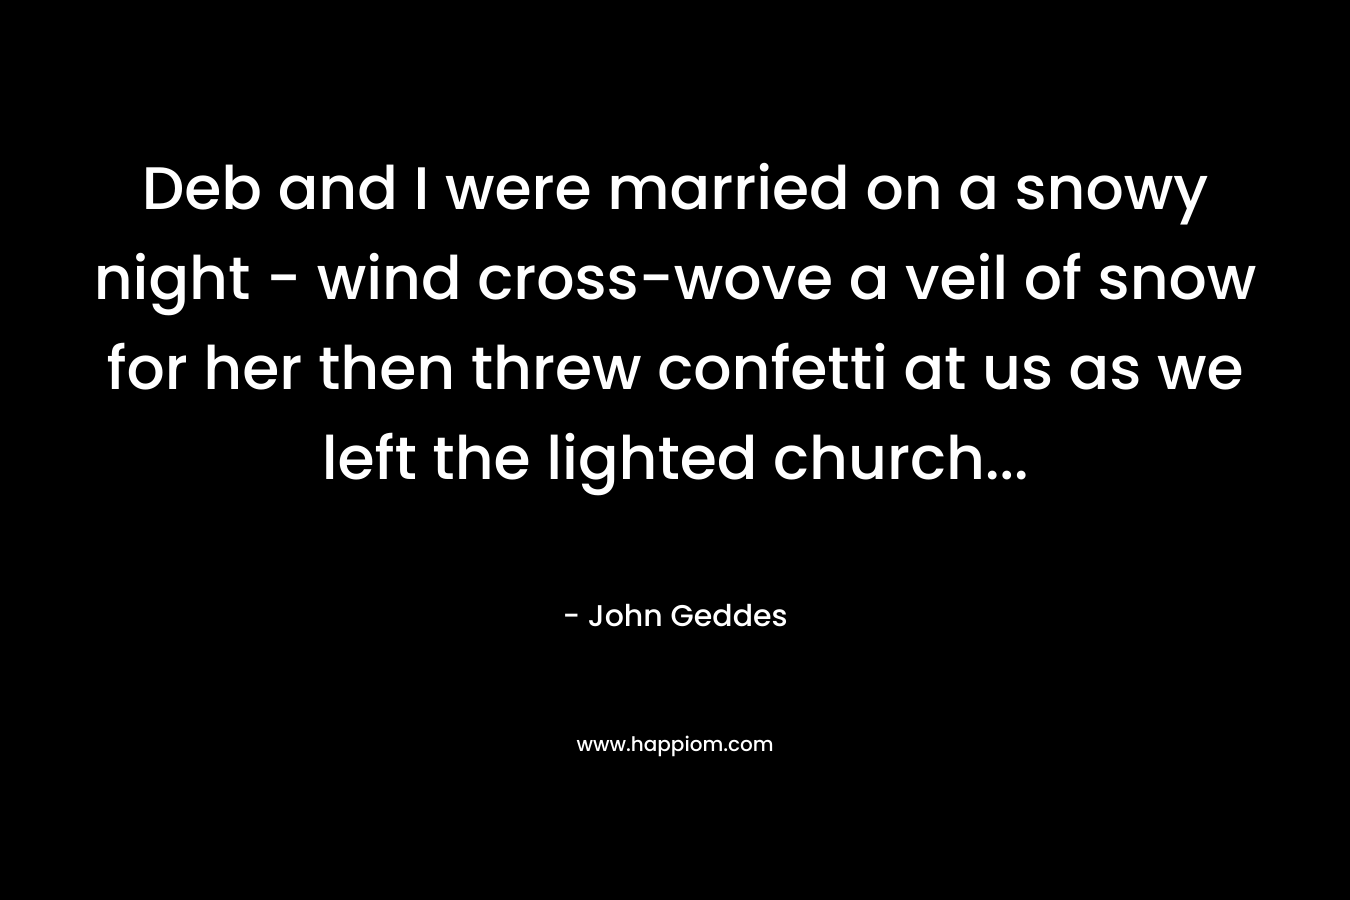 Deb and I were married on a snowy night - wind cross-wove a veil of snow for her then threw confetti at us as we left the lighted church...